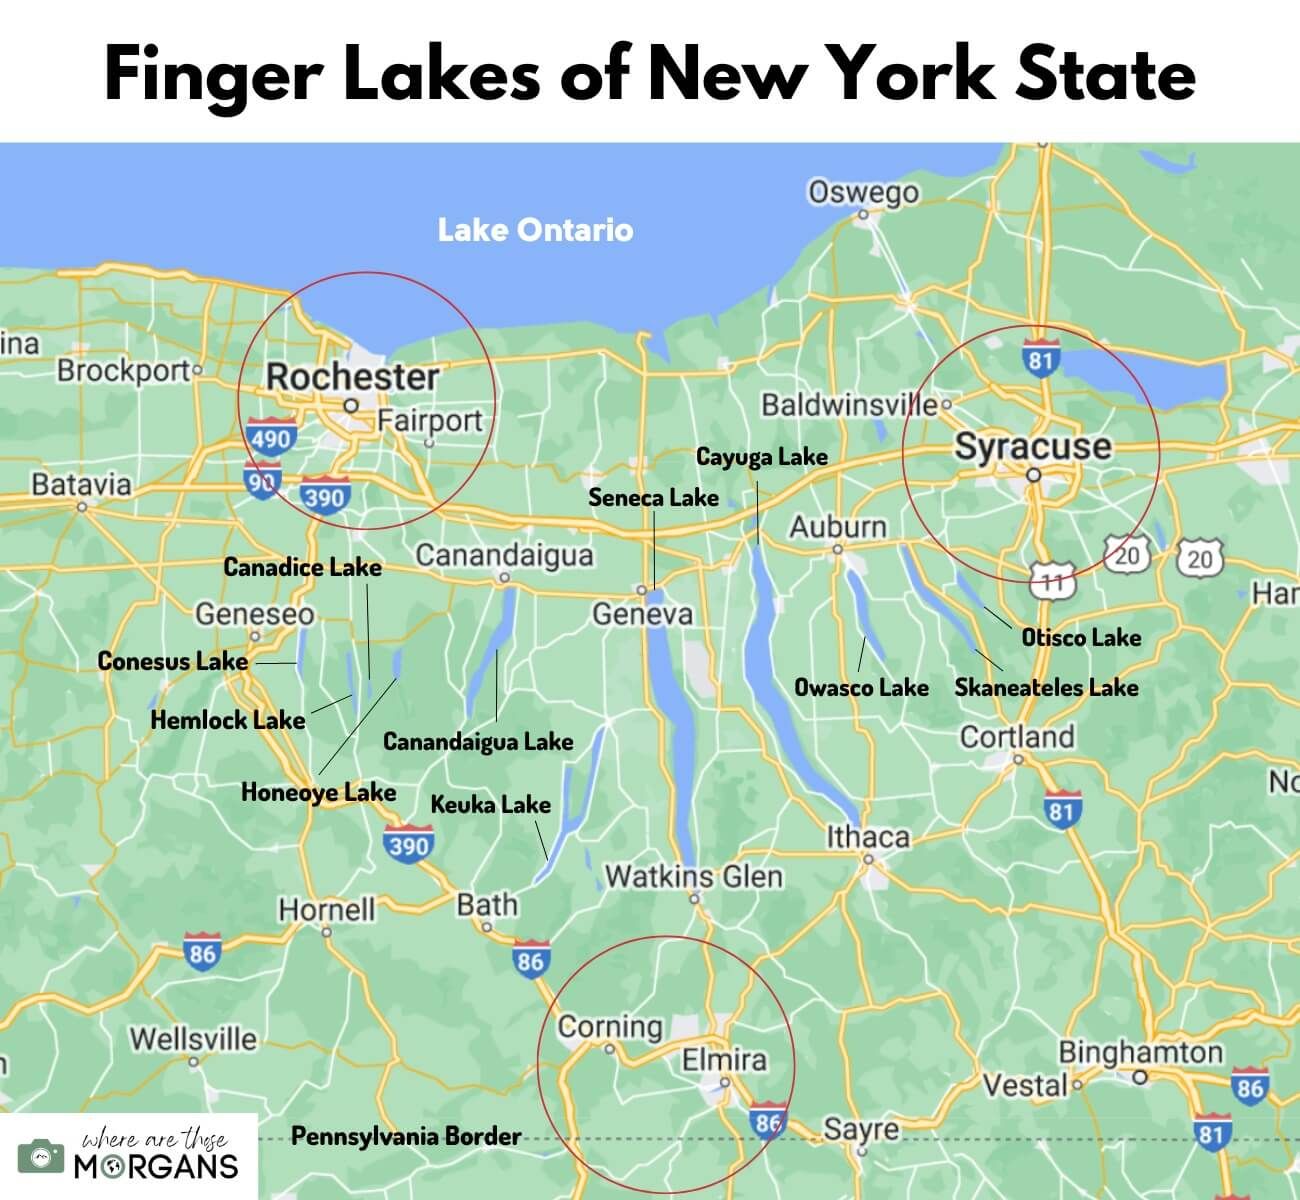 New York State Finger Lakes map